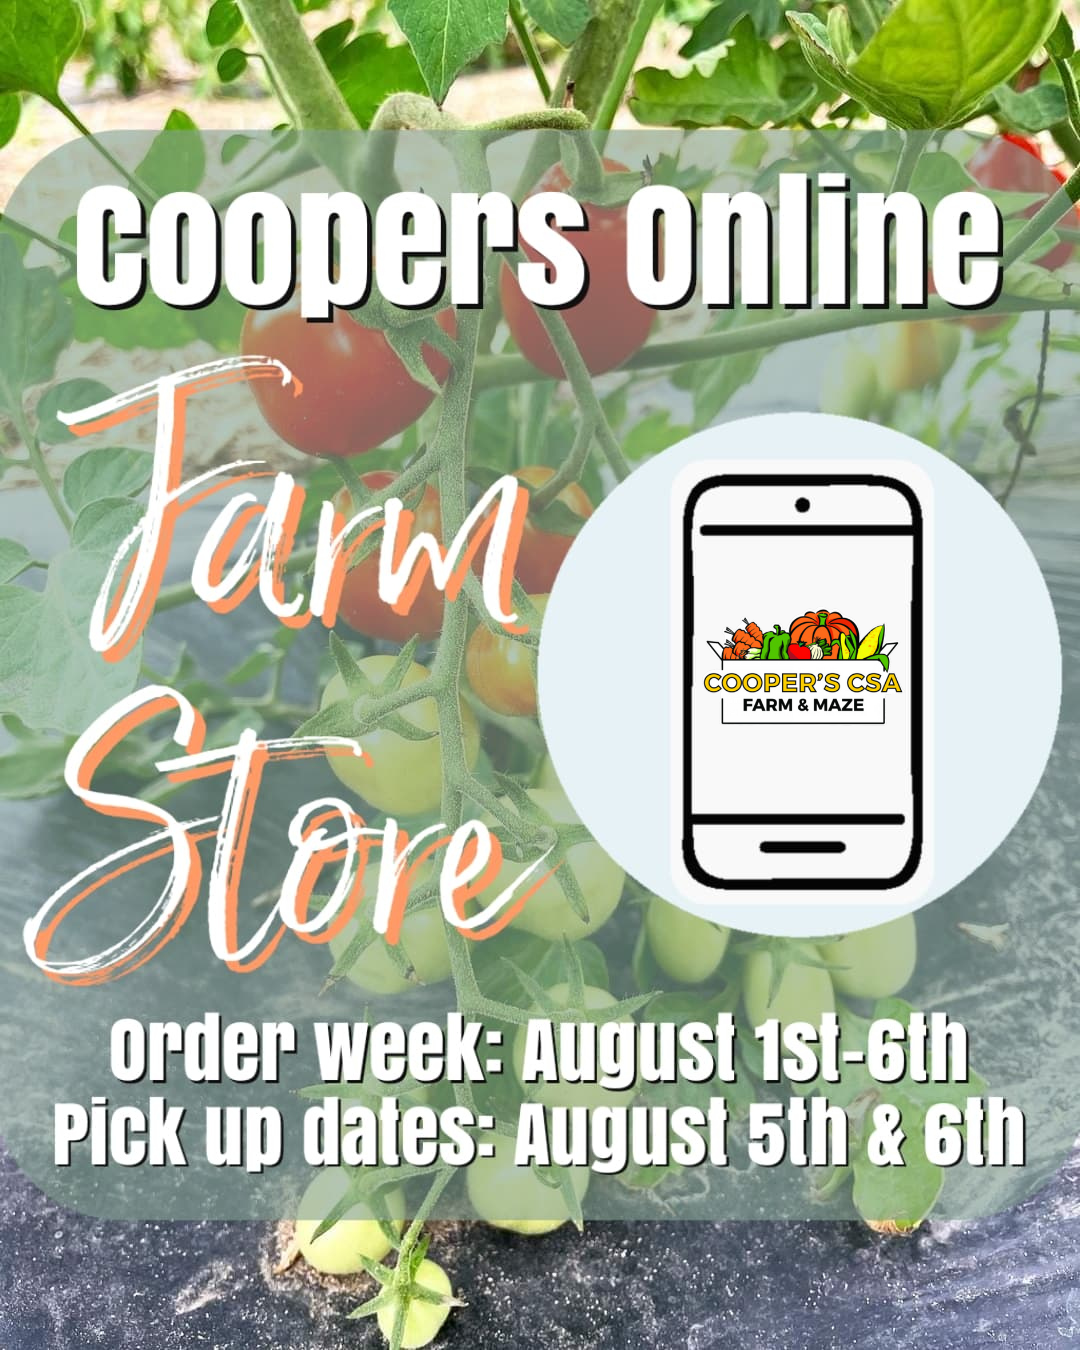 Coopers Online Farm Stand- August 1st-6th